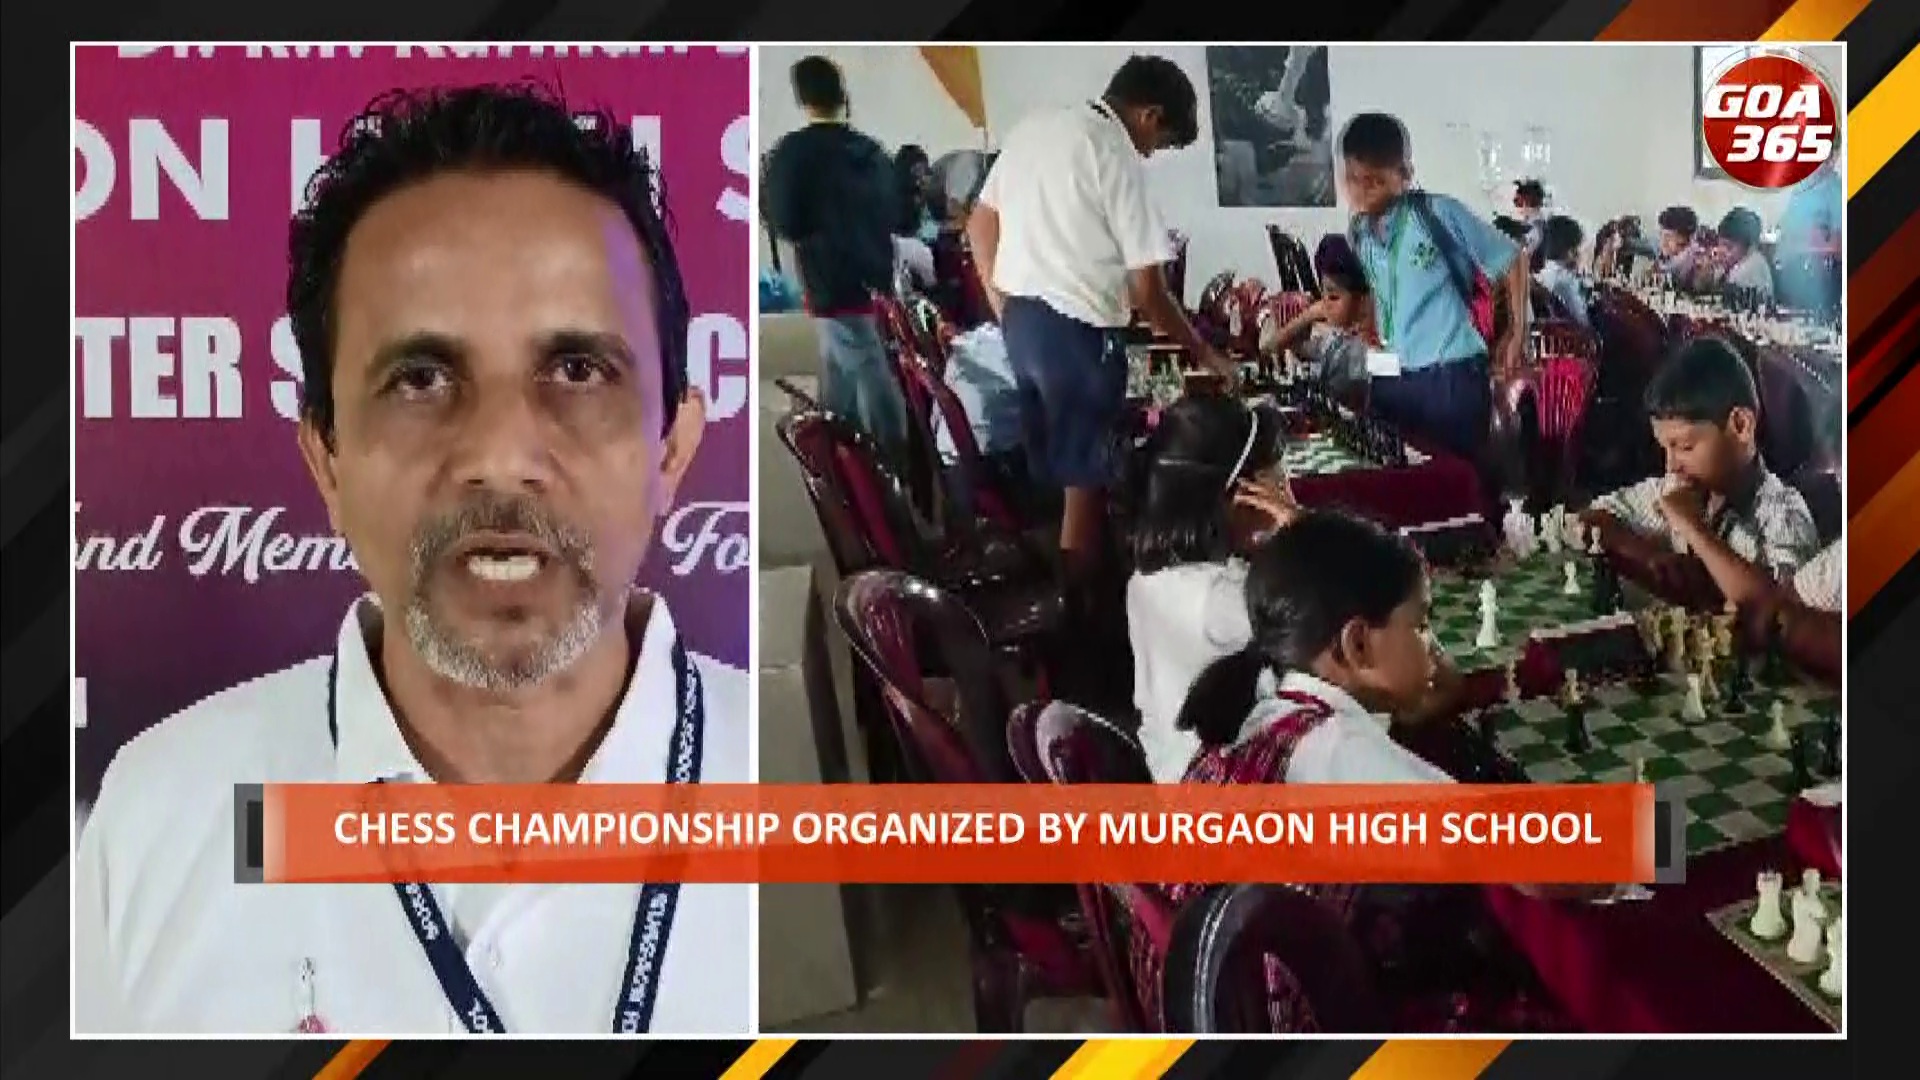 Goa  more than 240 students participated in the chess championship at Murgaon High School.